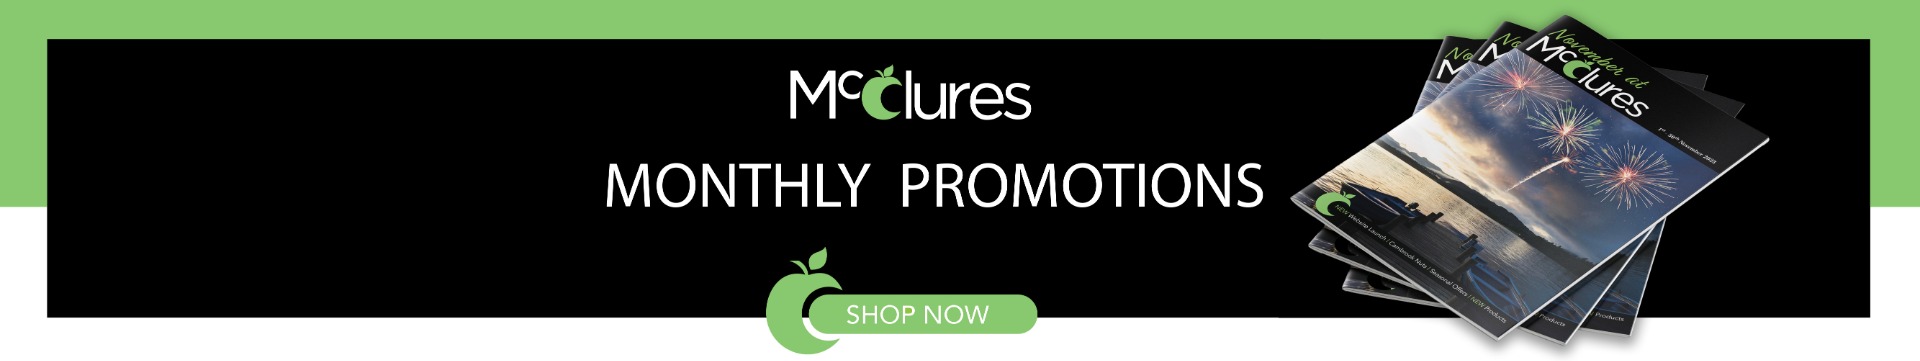 MONTHLY_PROMOTIONS_BANNER_-_November_copy